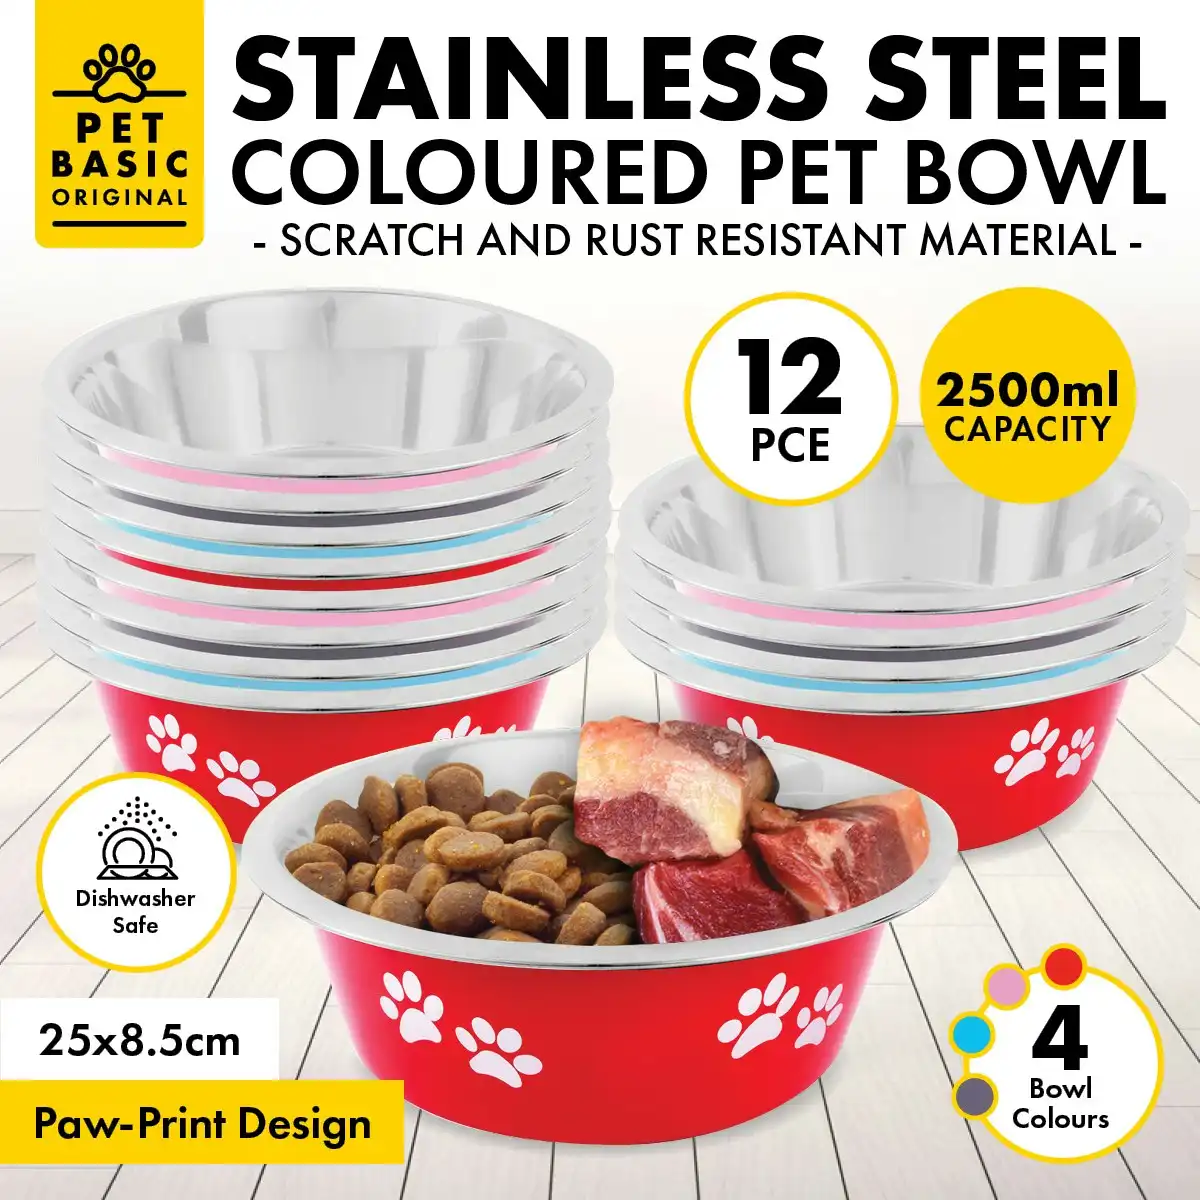 Pet Basic 12PCE Pet Bowl 25cm Stainless Steel Coloured With Paw Prints 2500ml